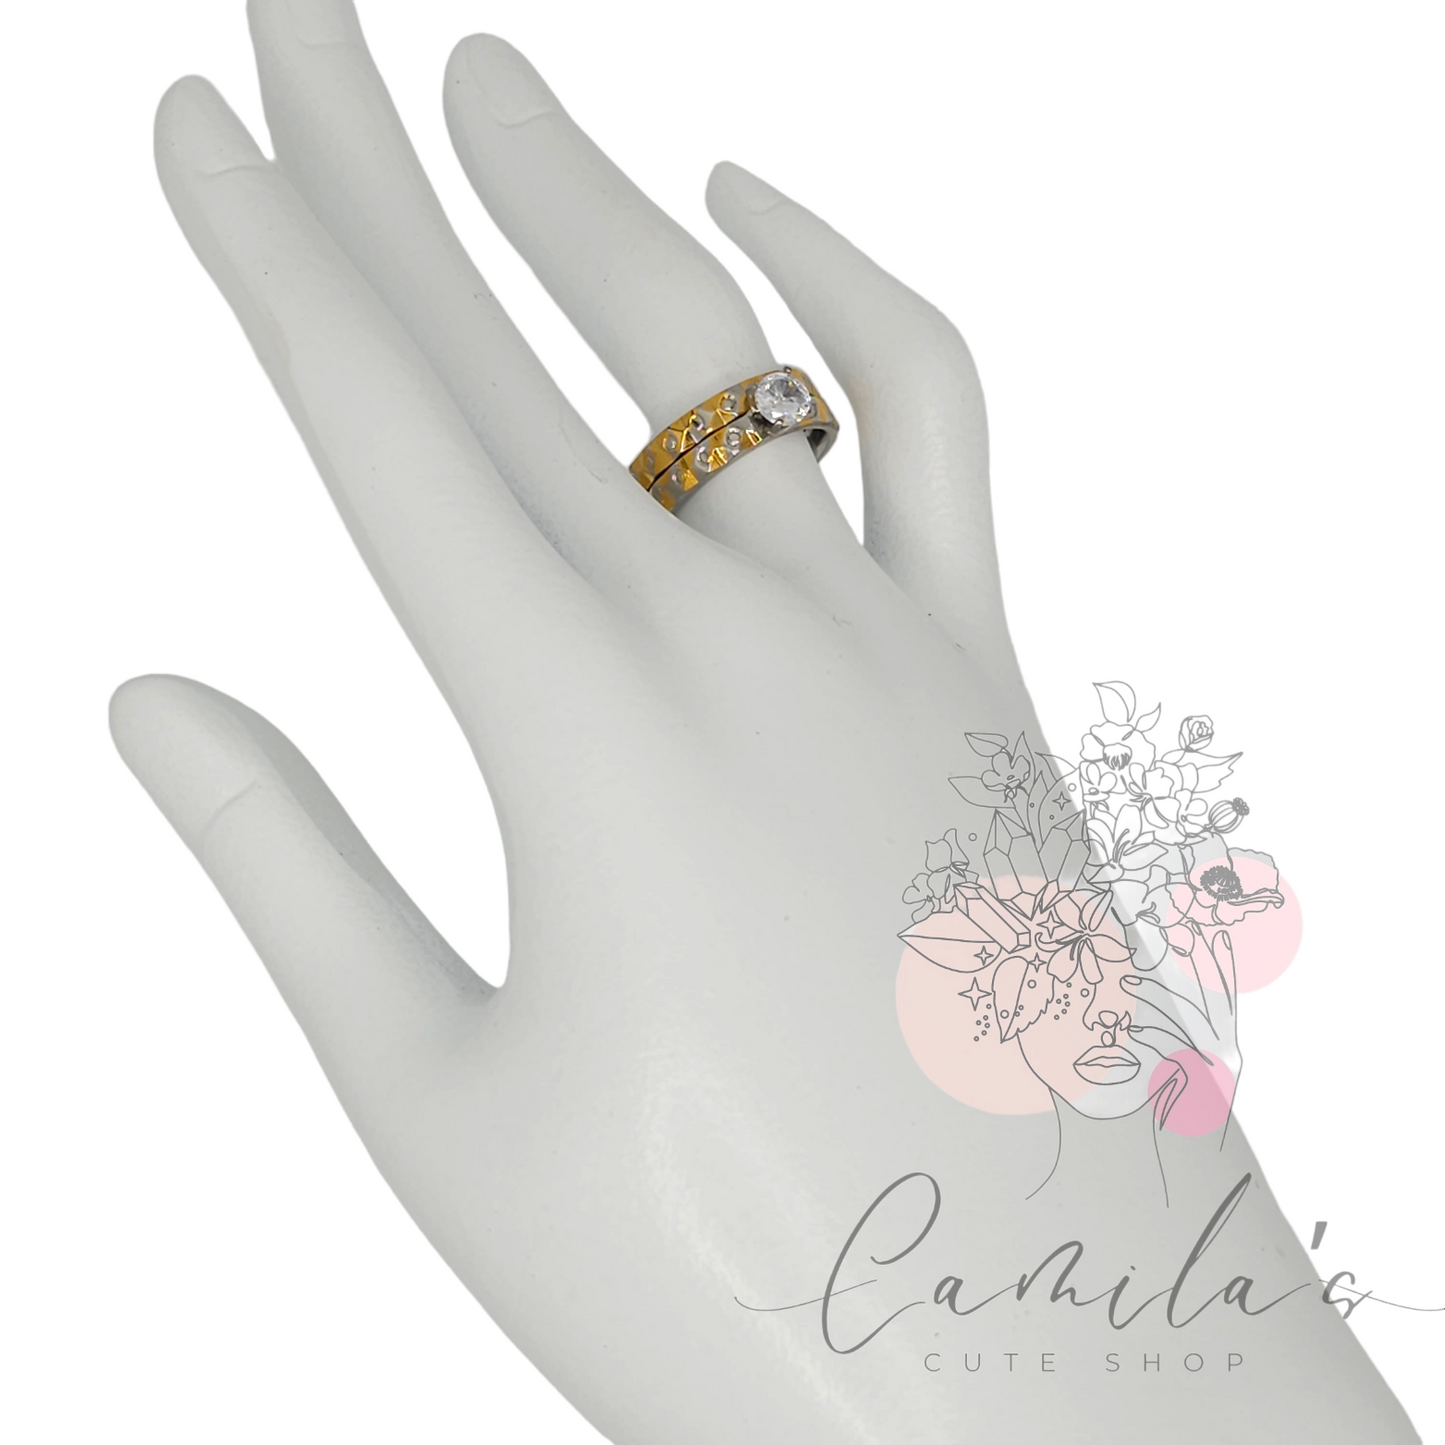 Delicate Texturized Silver and Gold Rings Couple Rings Stainless Steel